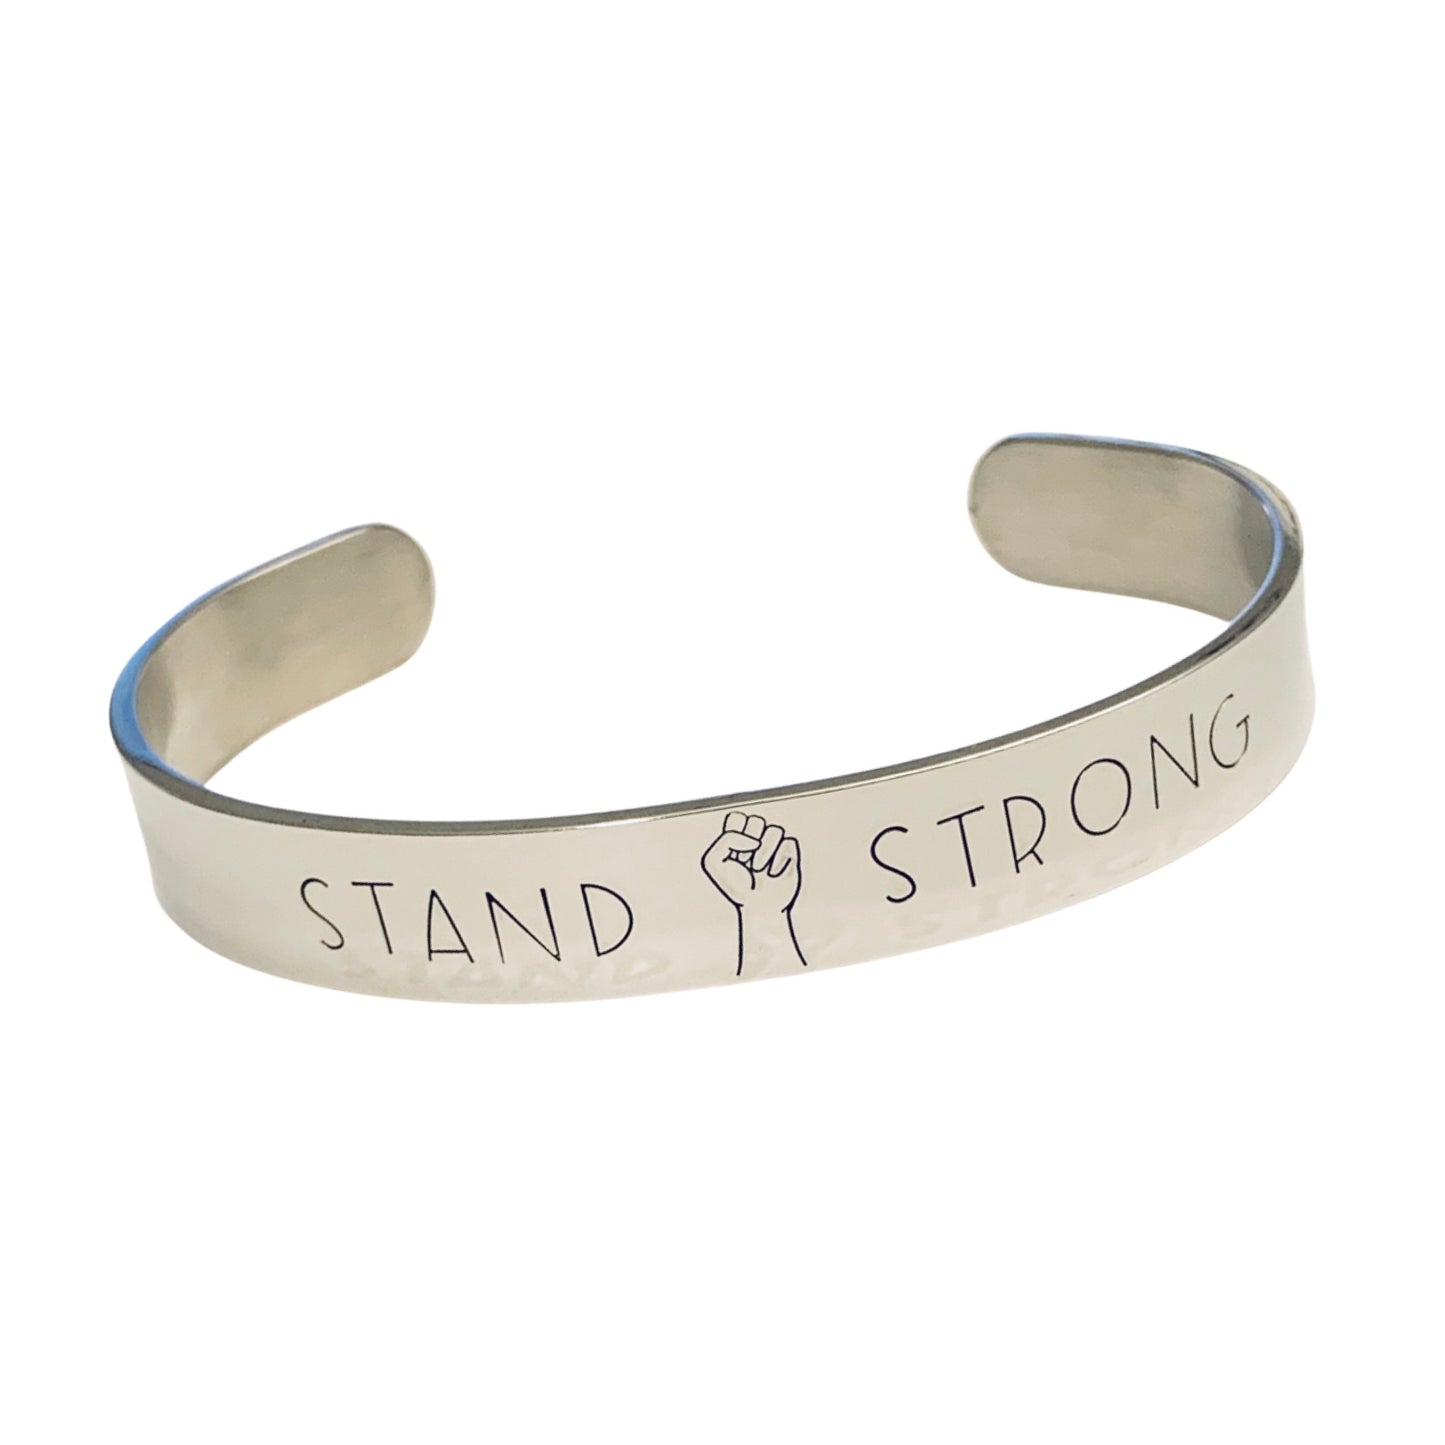 Stand Strong - Cuff Bracelet